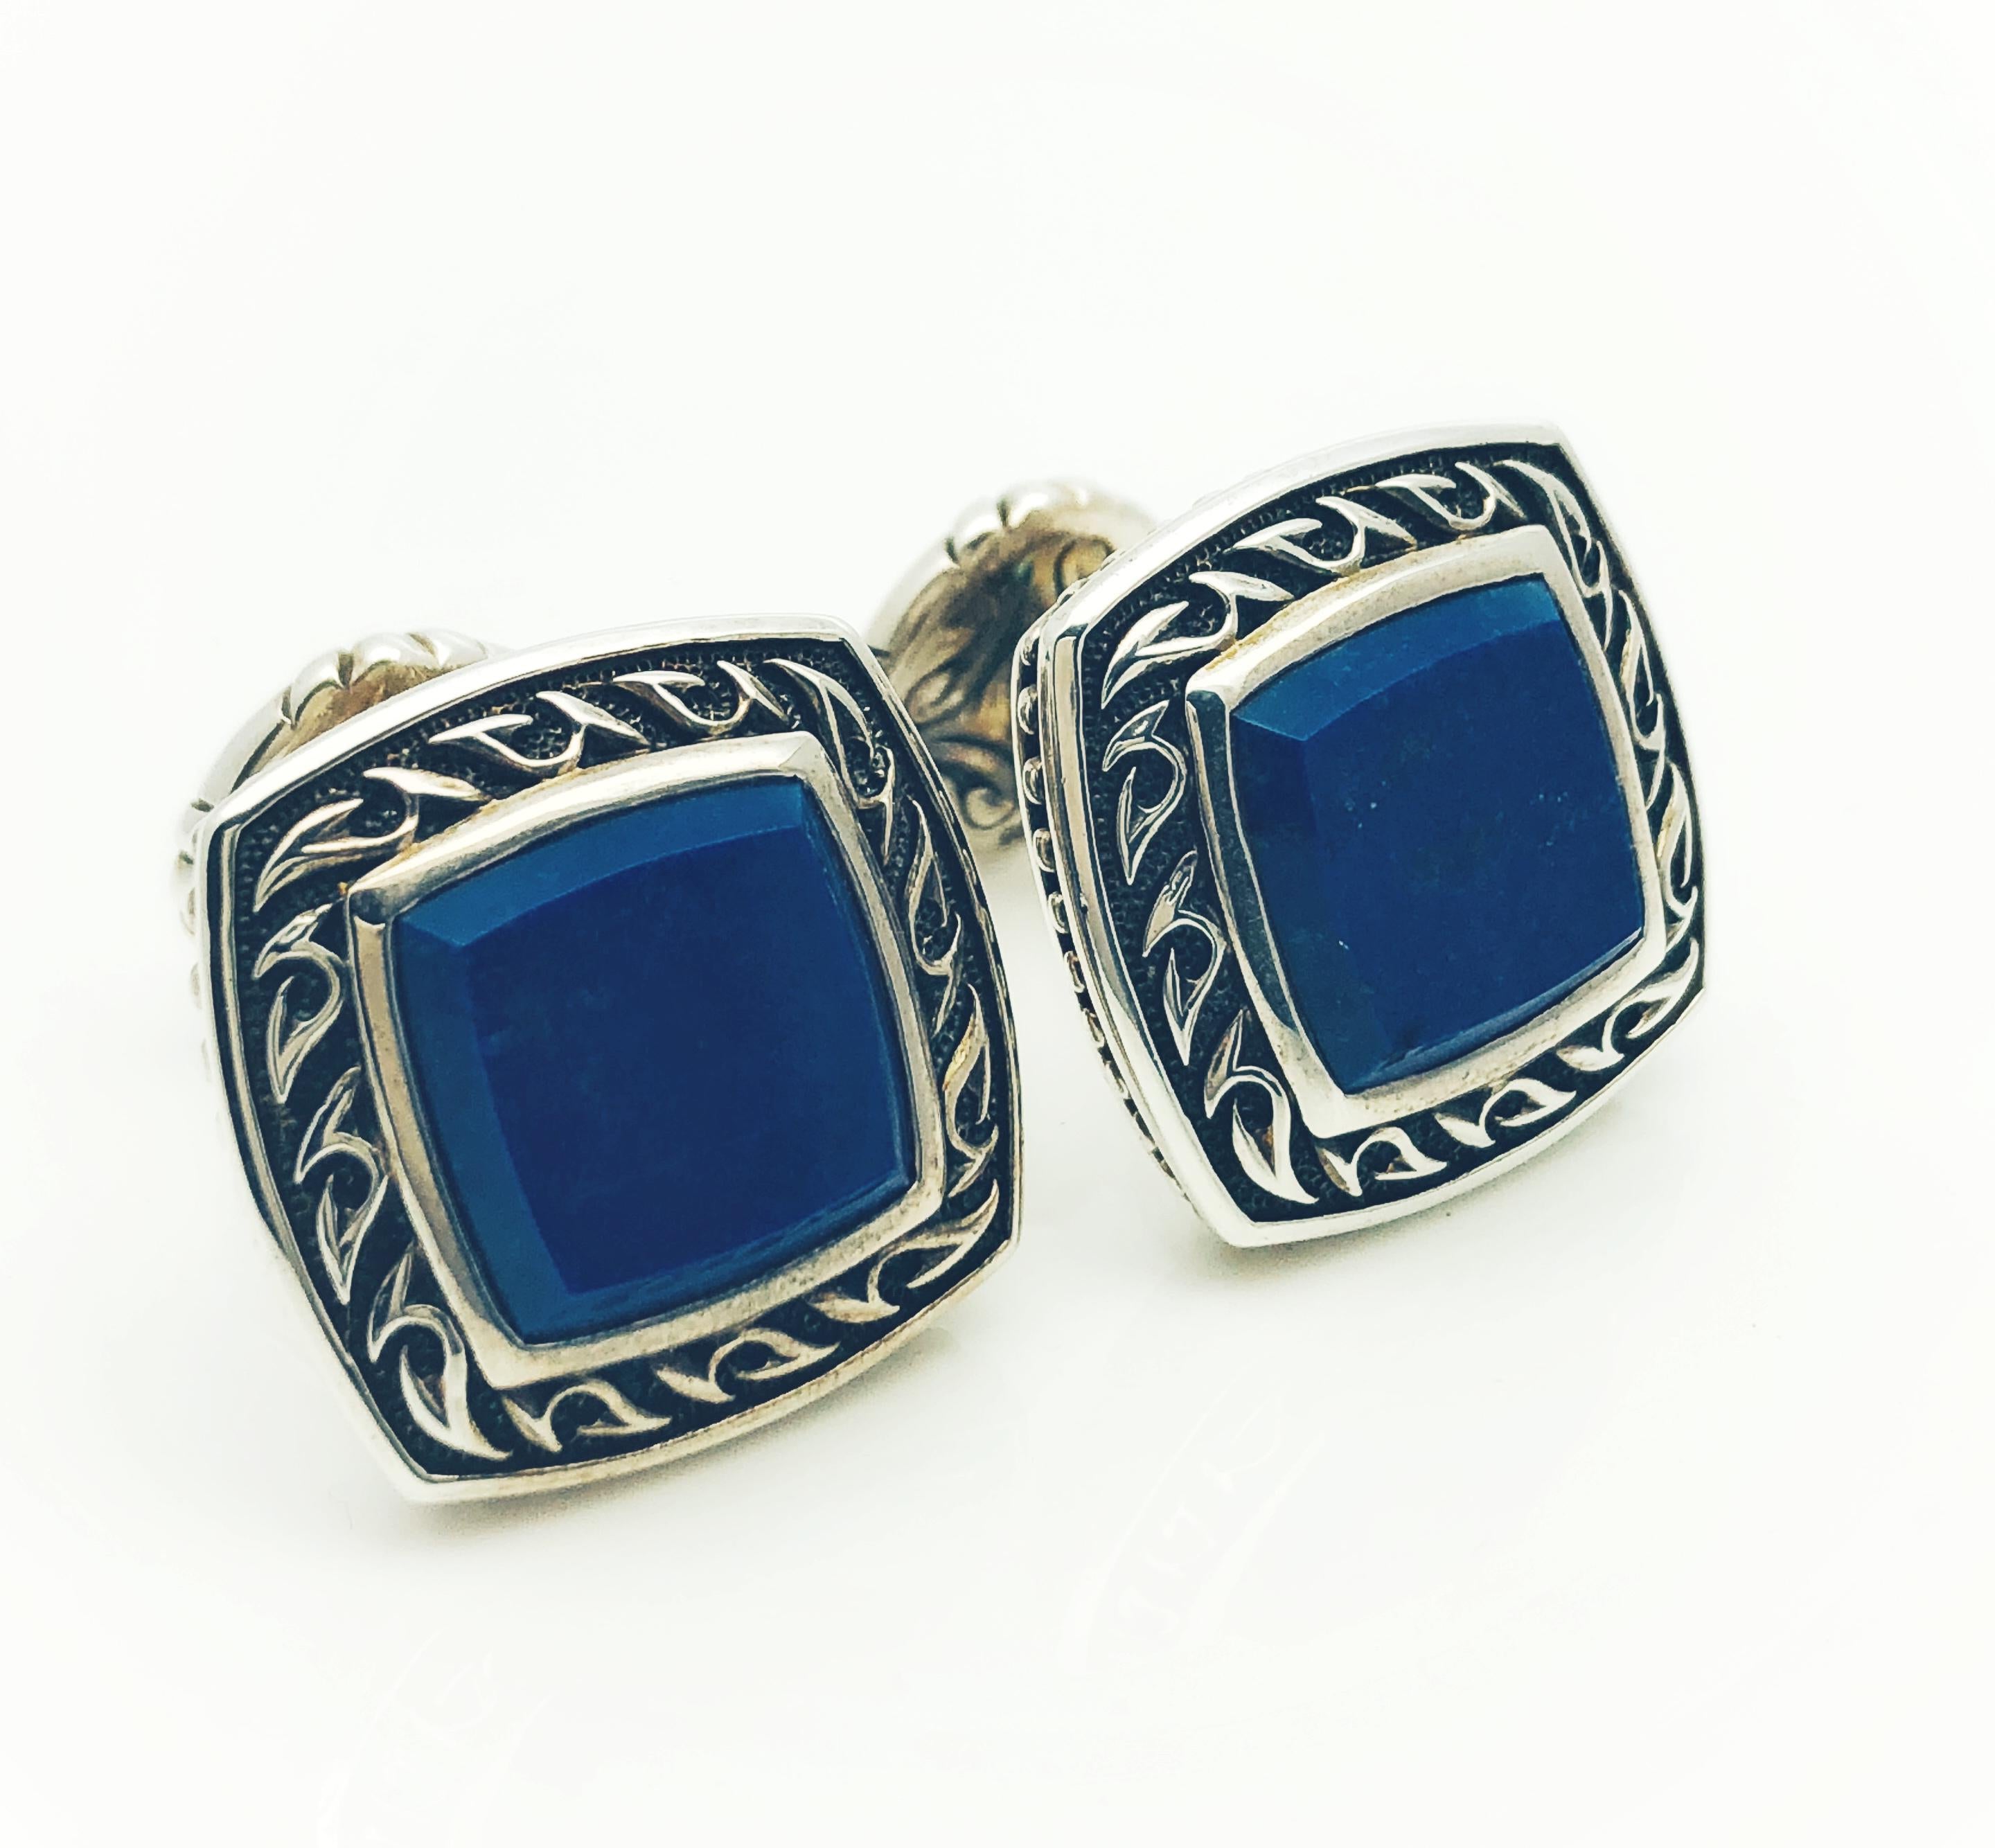 The Detail work on these cufflinks is just amazing! These Scott Kay cufflinks are made in Sterling Silver with each having a stunning blue piece of Lapis Lazuli at the square center. They measure 3/4 inch square and weigh 28 grams.